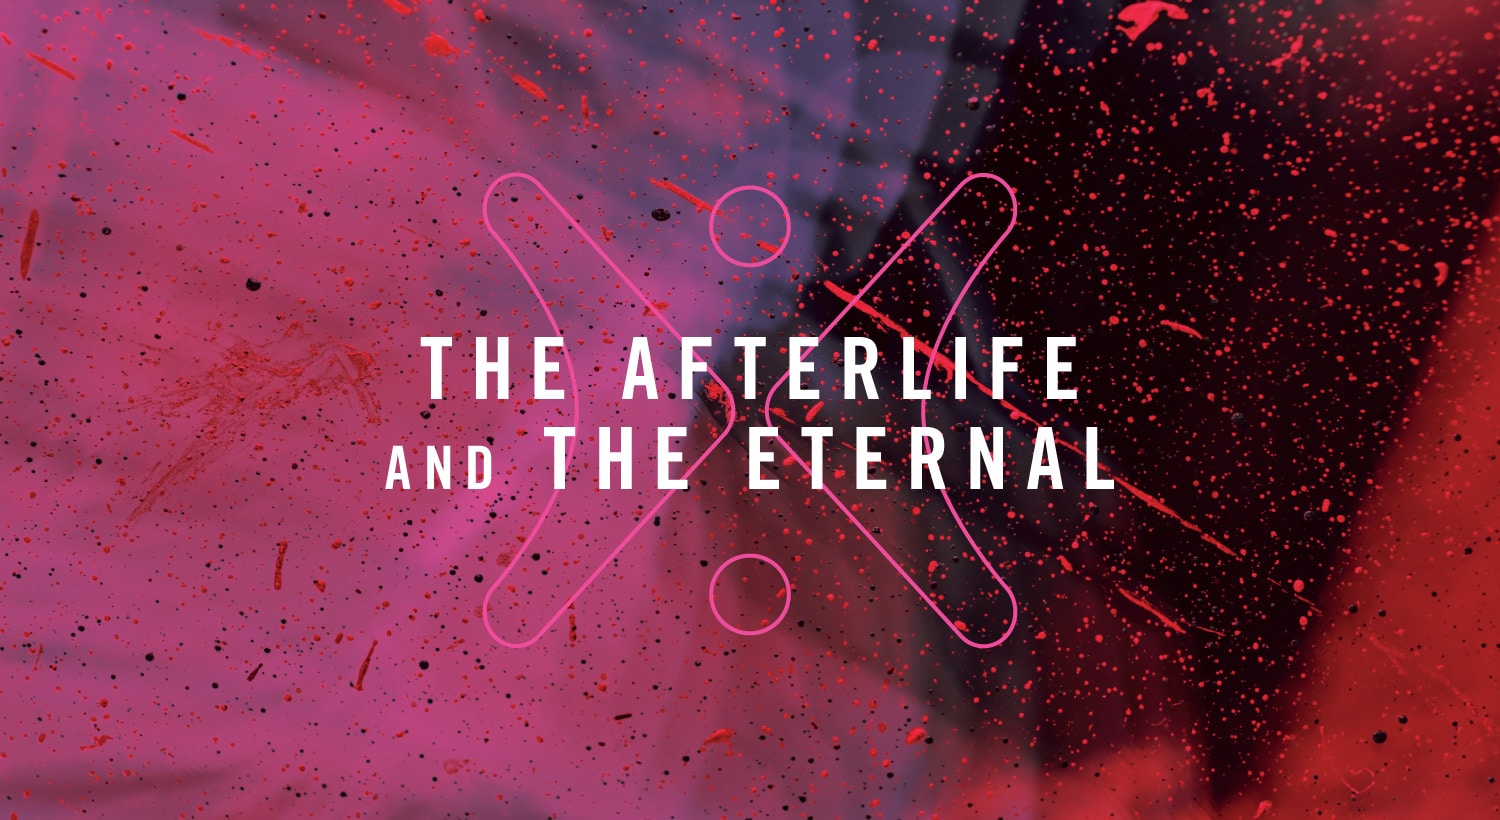 The Afterlife and the Eternal with Greg Laurie at Harvest Christian Fellowship